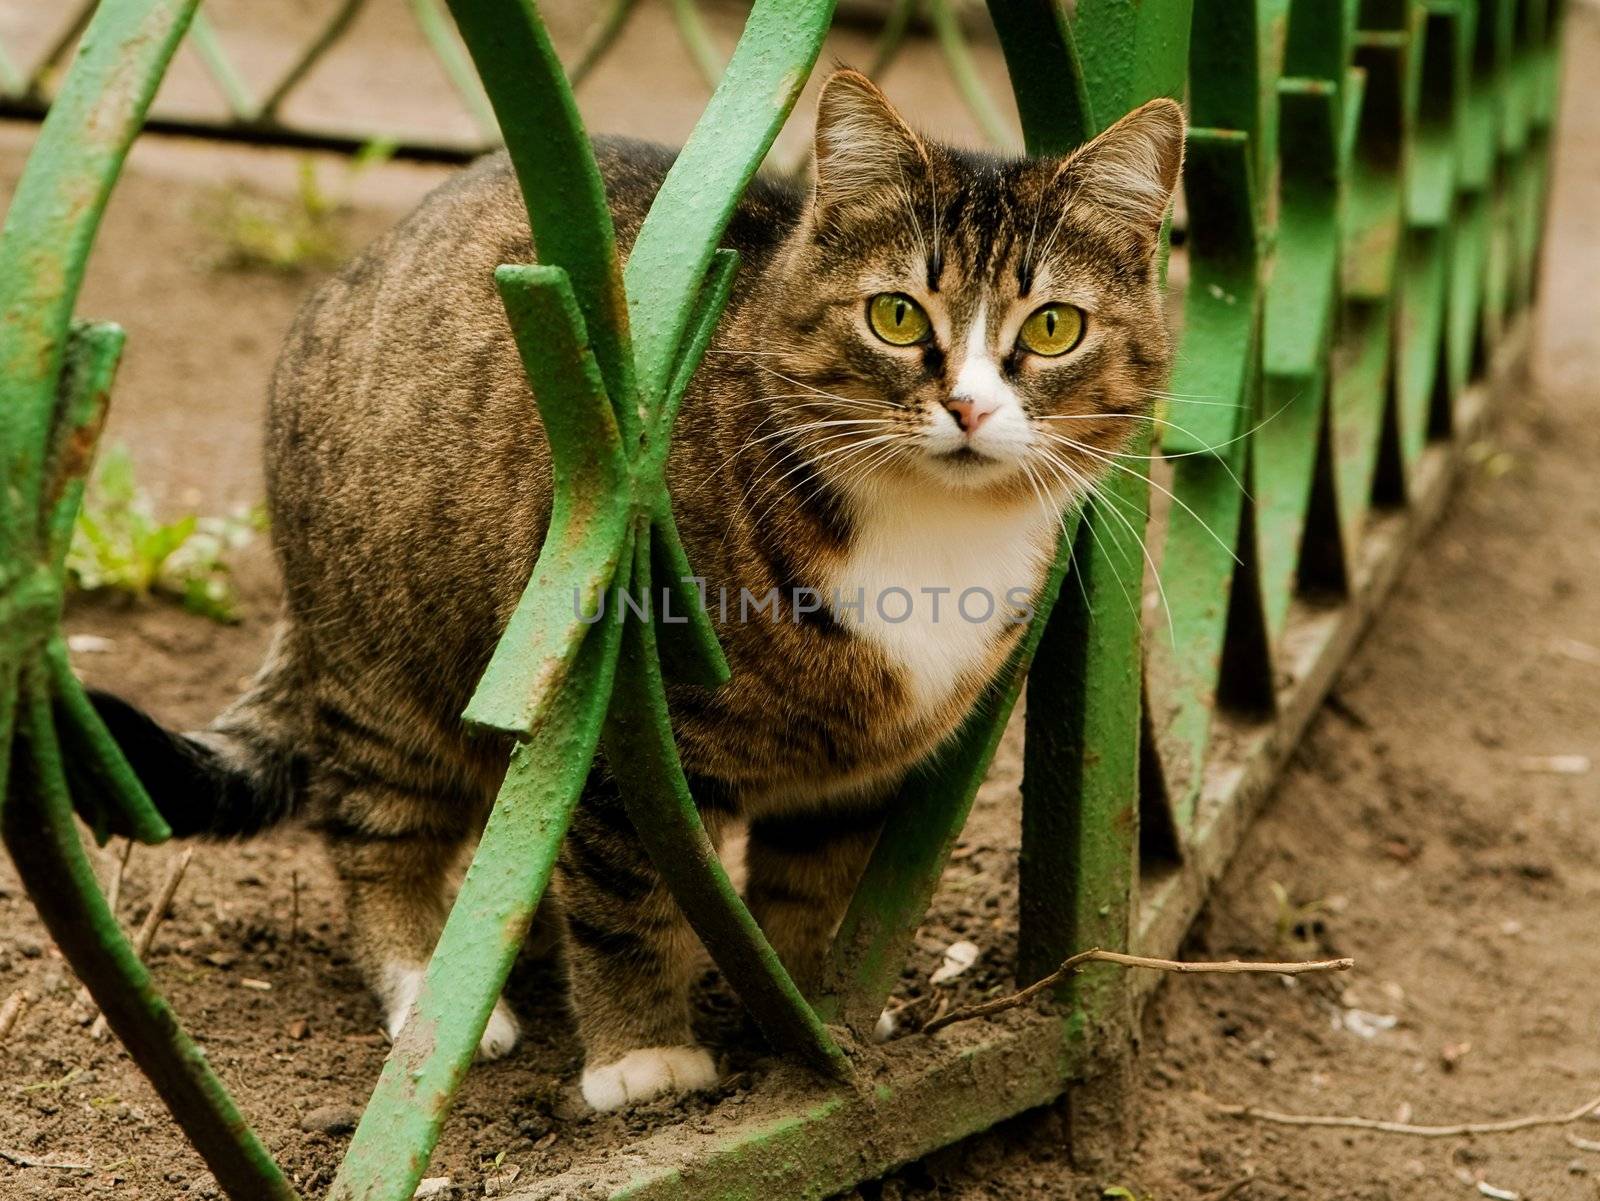 The cat looks directly in a shot near to a metal fencing 
